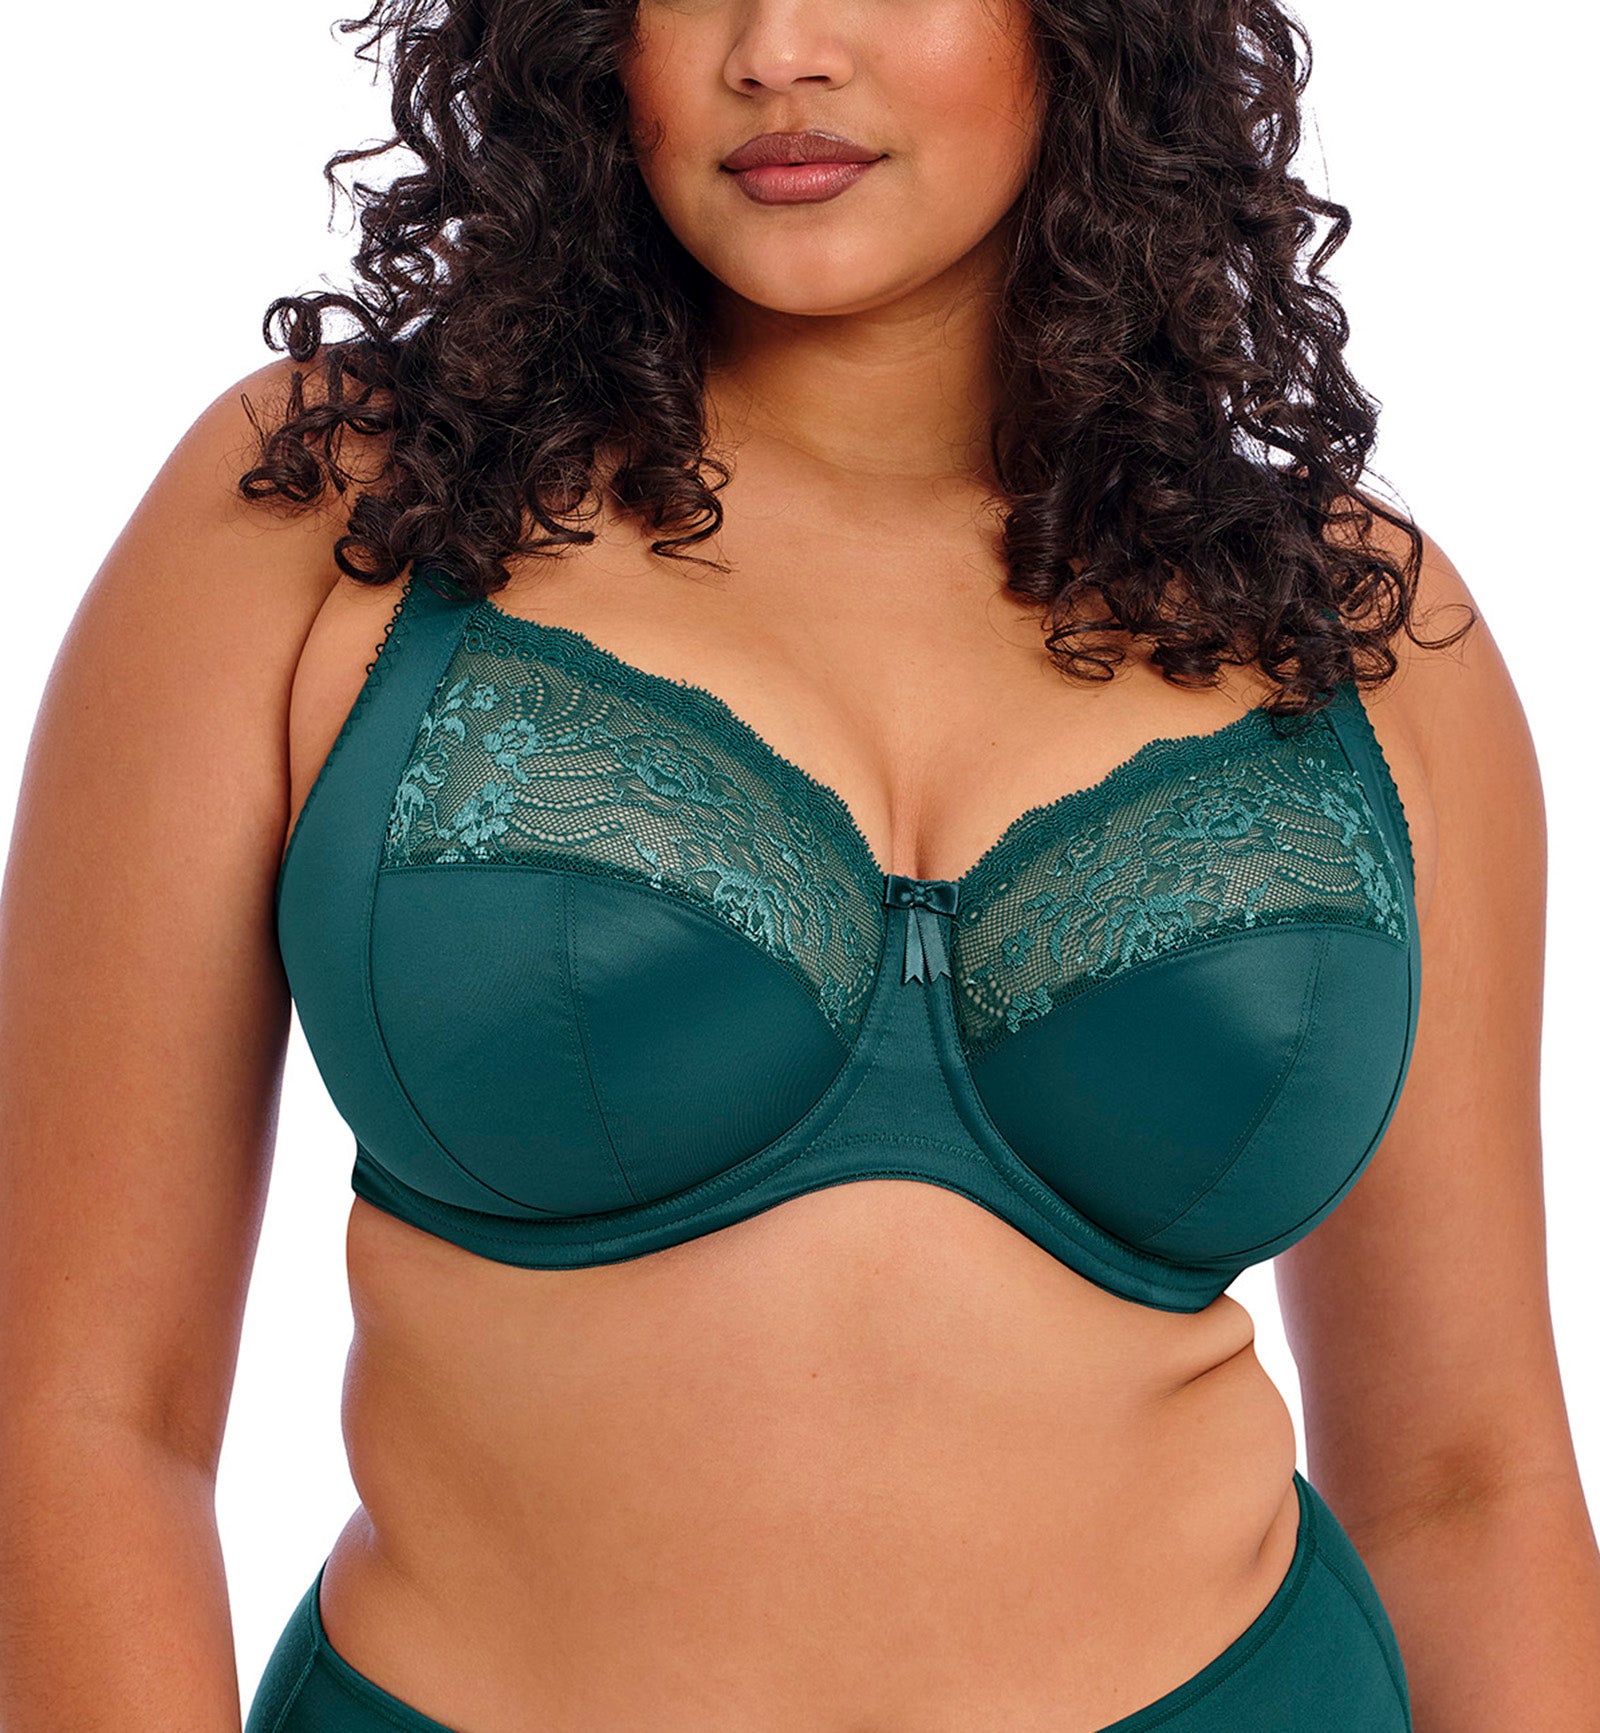 Elomi Morgan Stretch Lace Banded Underwire Bra (4111),32GG,Deep Teal - Deep Teal,32GG